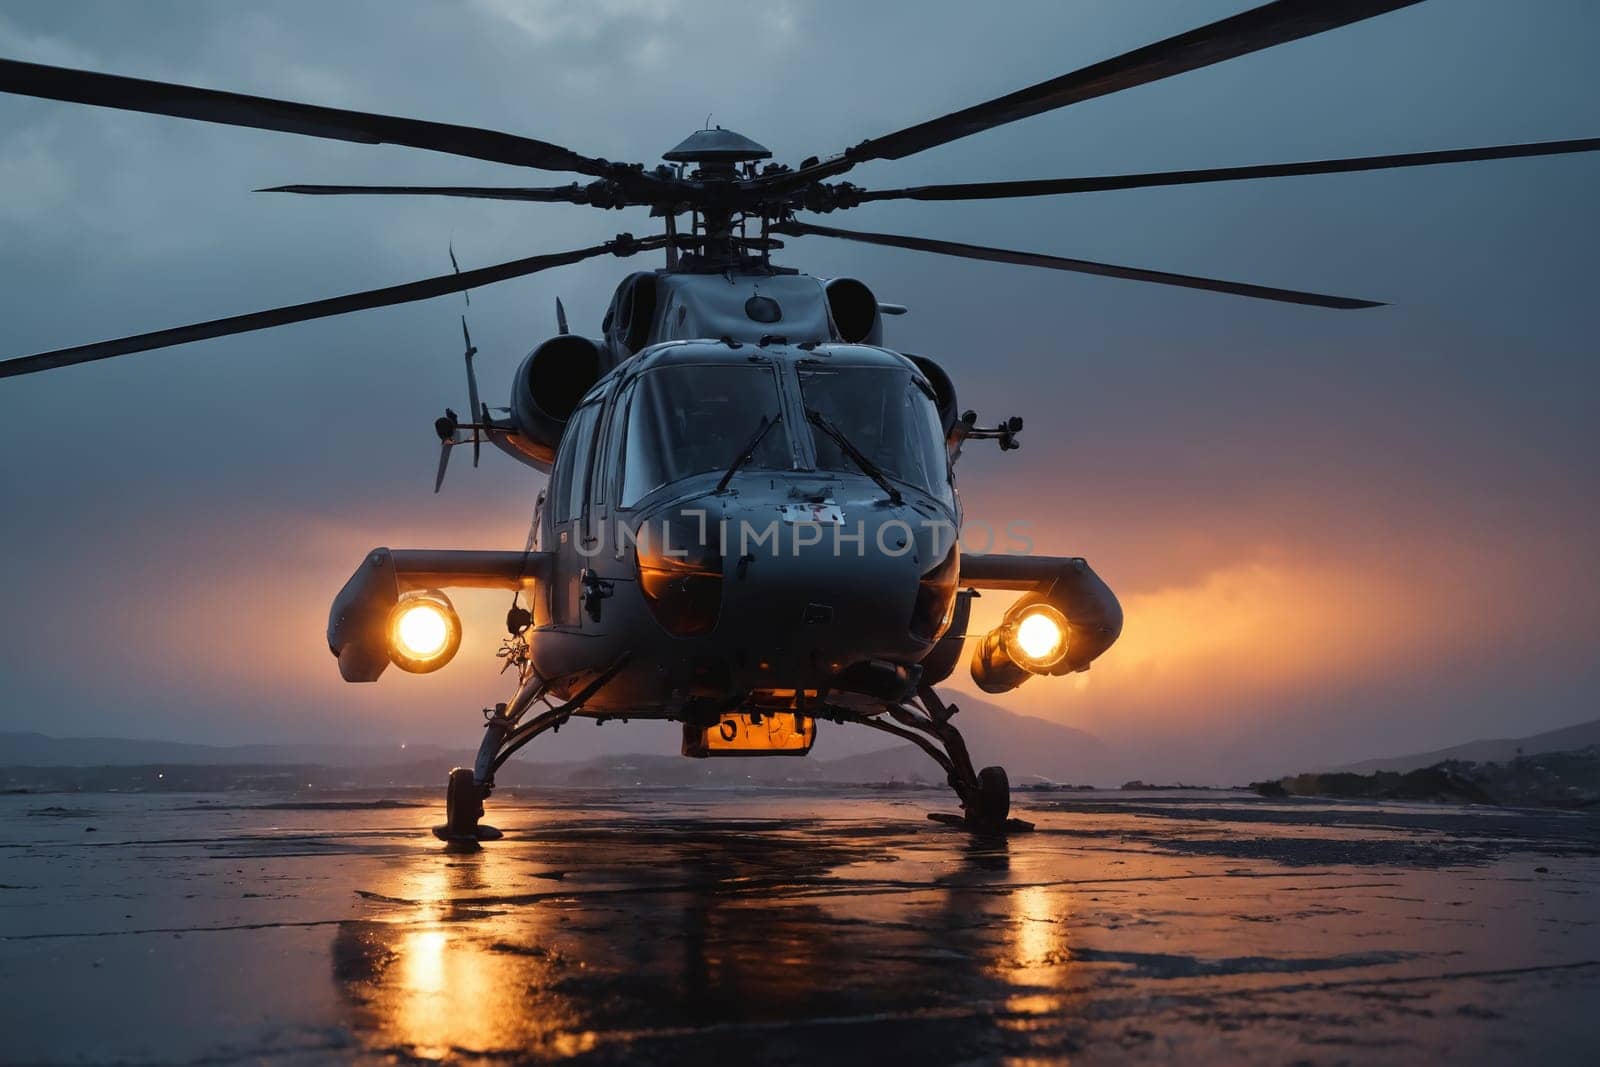 A powerful helicopter with its lights piercing the night, blades in motion, set against a twilight sky.